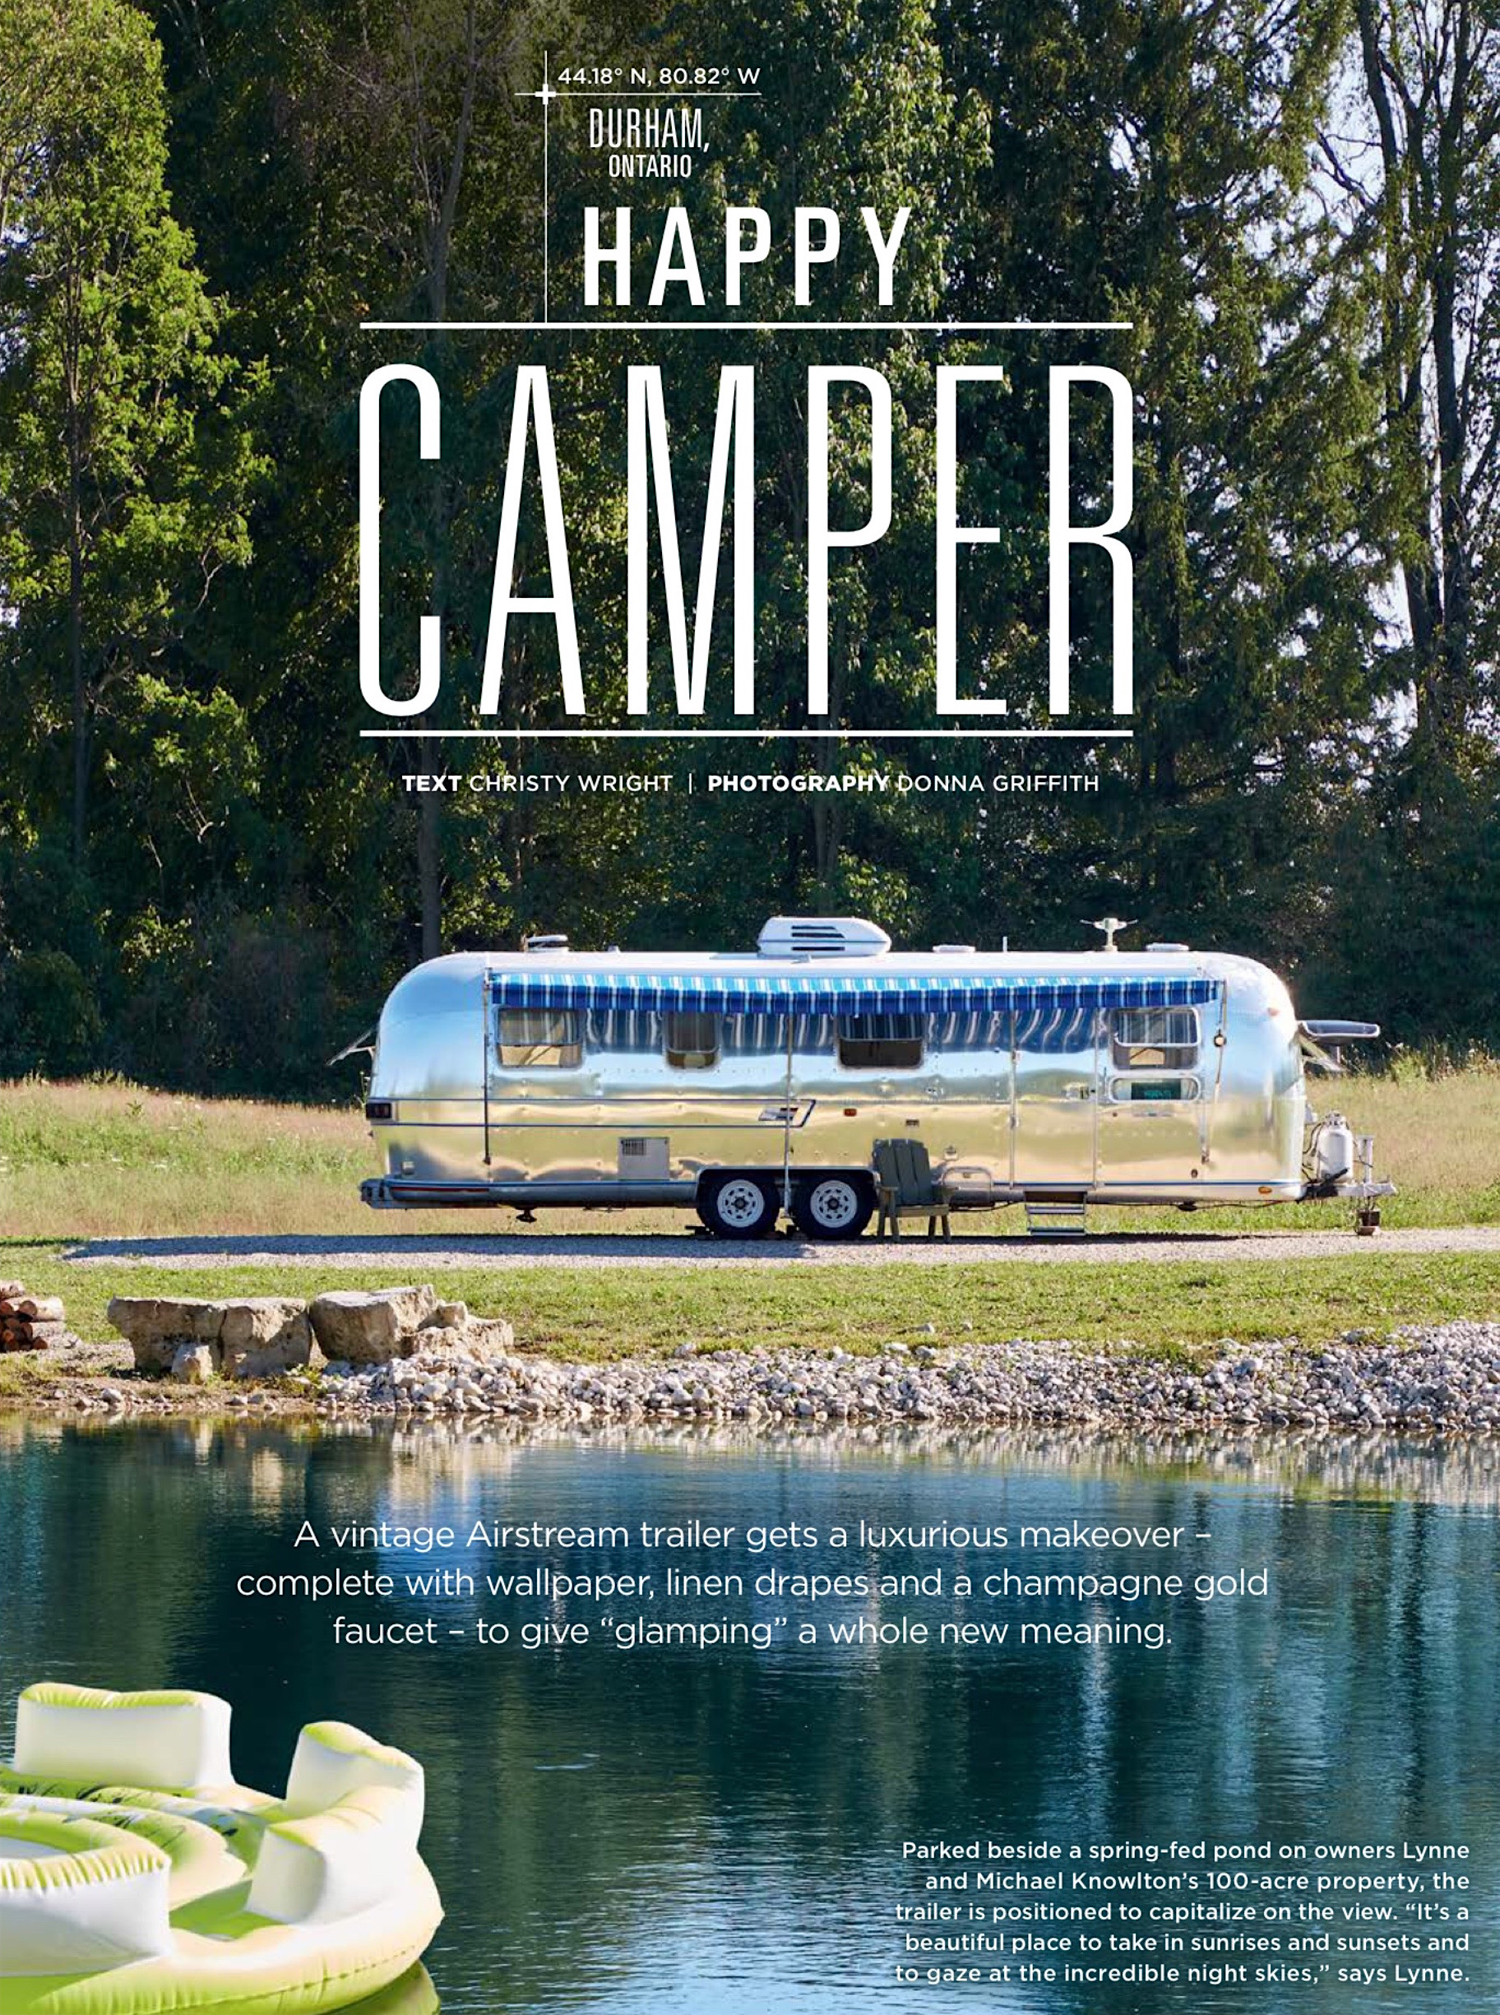 #HappyCamperAirstream featured in @StyleATHome via Lynne Knowlton DESIGN THE LIFE YOU WANT TO LIVE